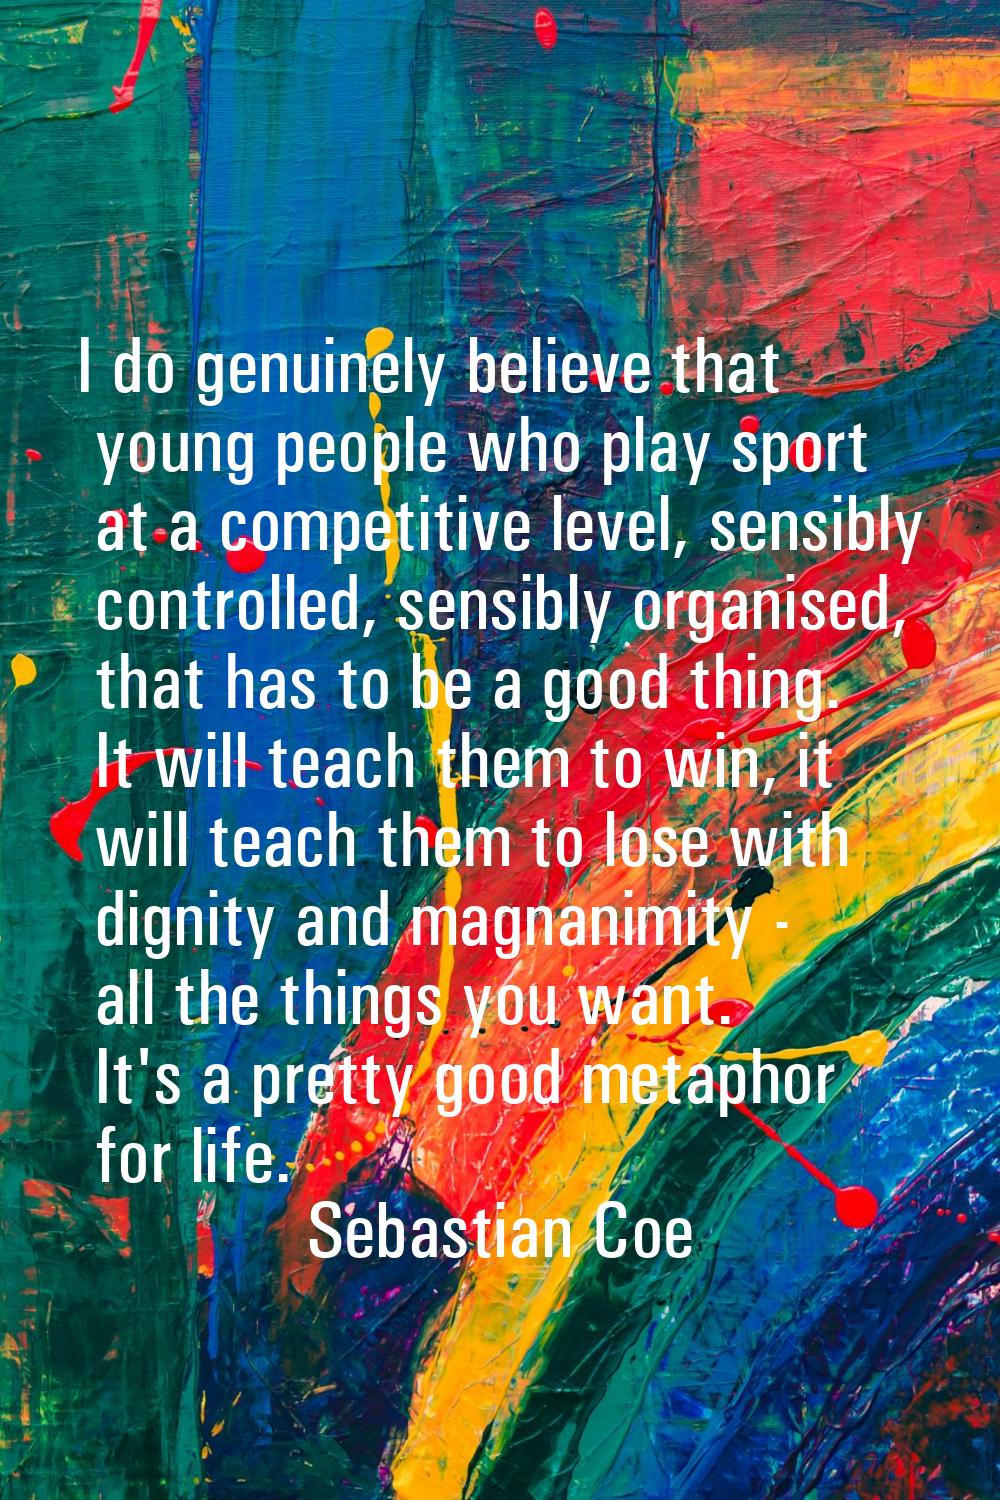 I do genuinely believe that young people who play sport at a competitive level, sensibly controlled